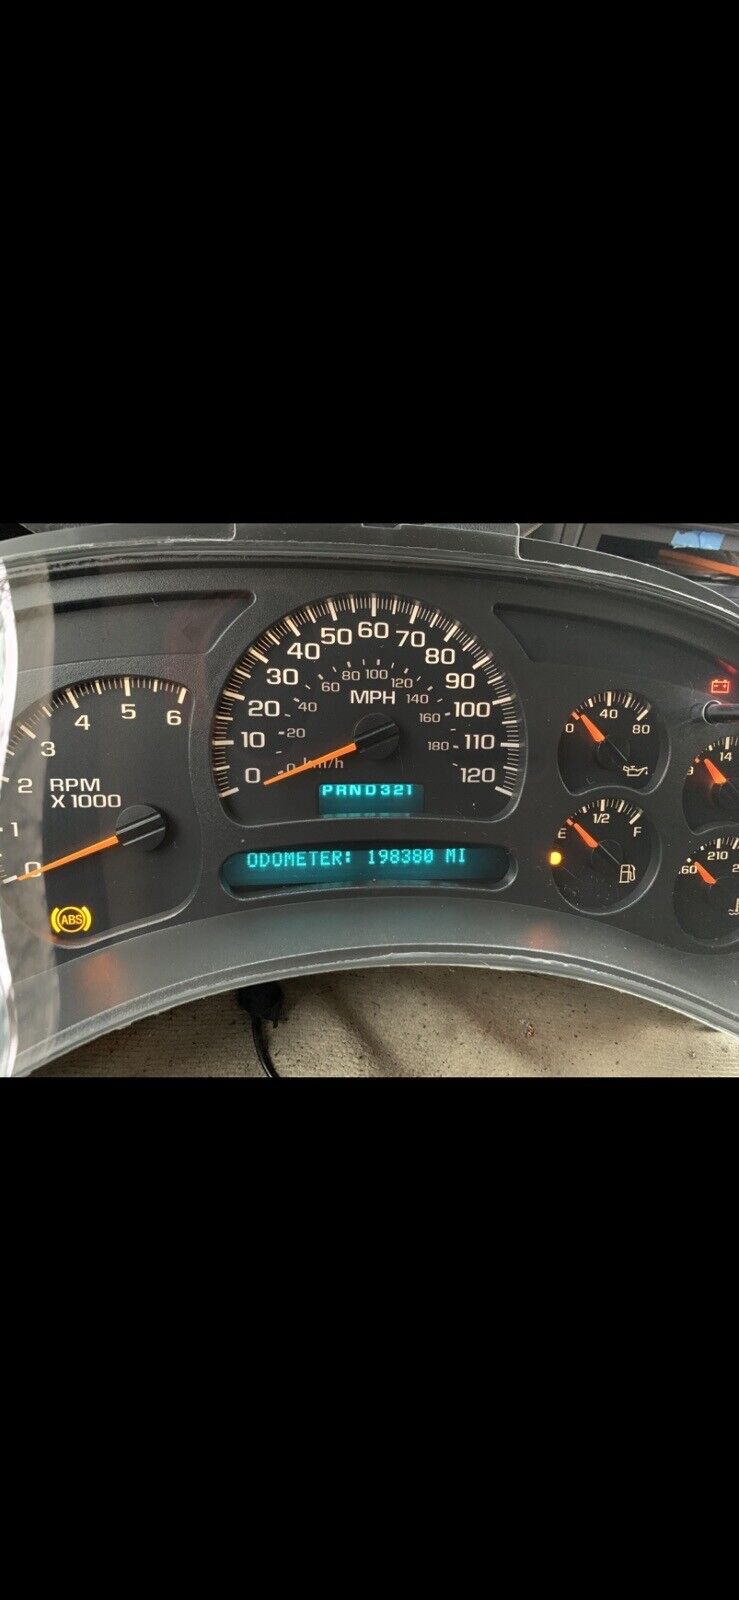 2003-2006 GM, CHEVROLET instrument cluster rebuilt, programmed and guaranteed